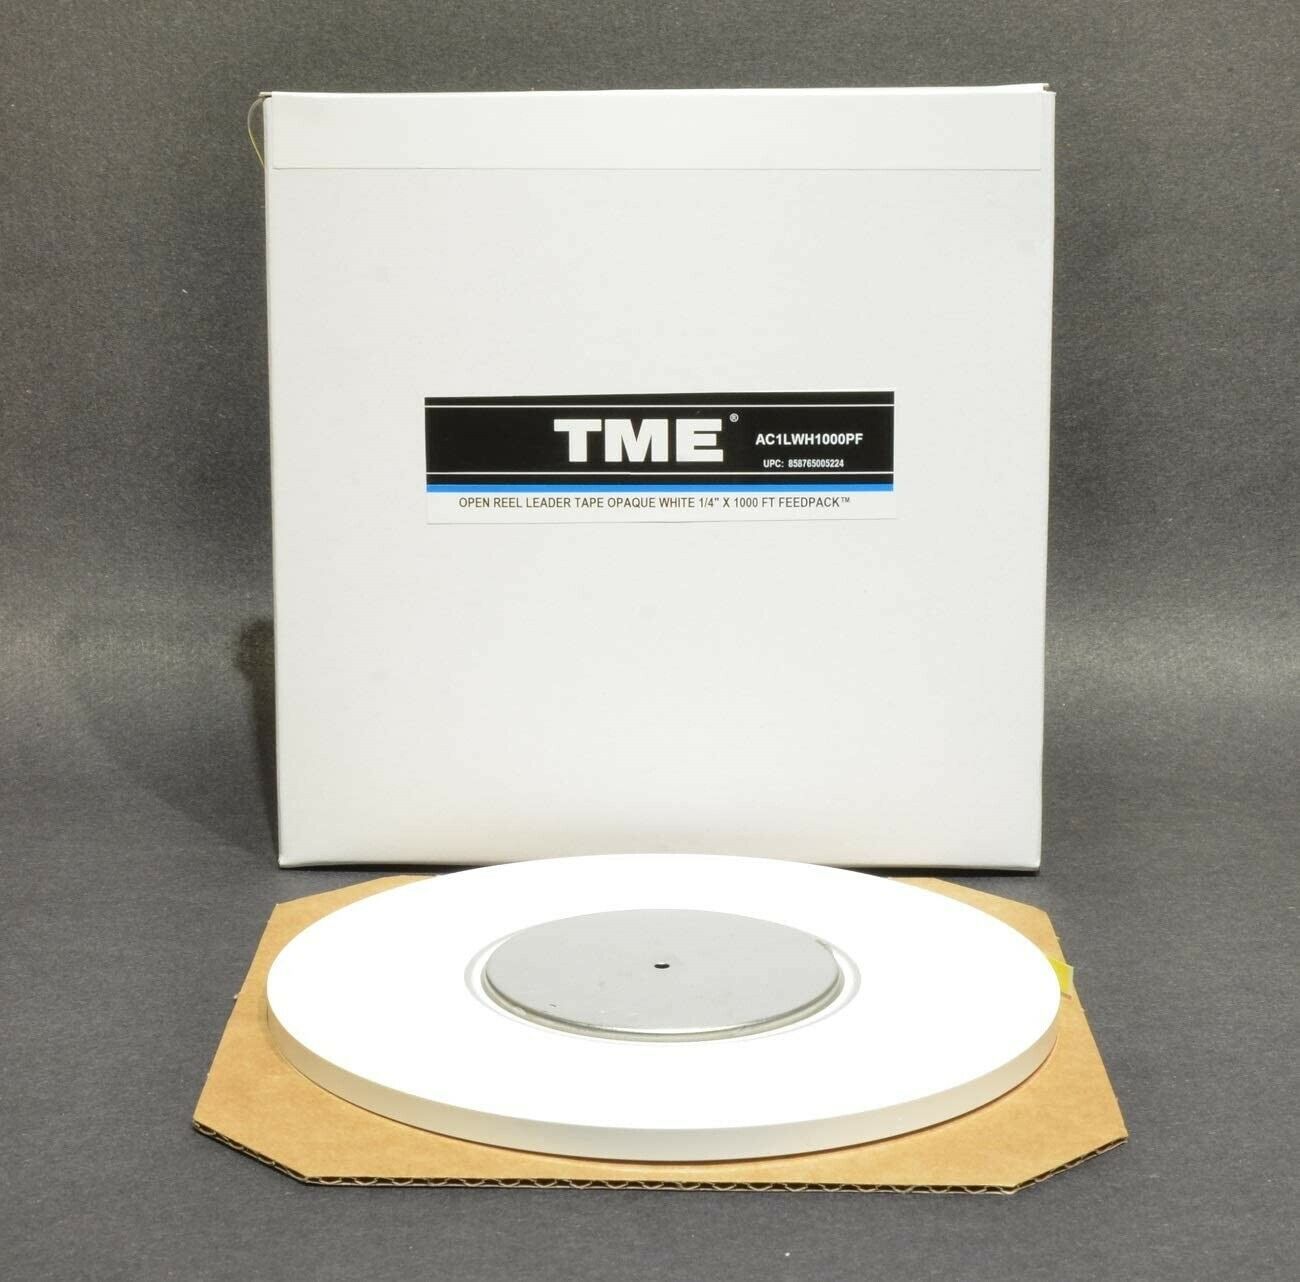 Open Reel Audio Leader Tape Solid White 1/4 X 1000 Ft or 500 Ft Feedpack  Pancake by TME